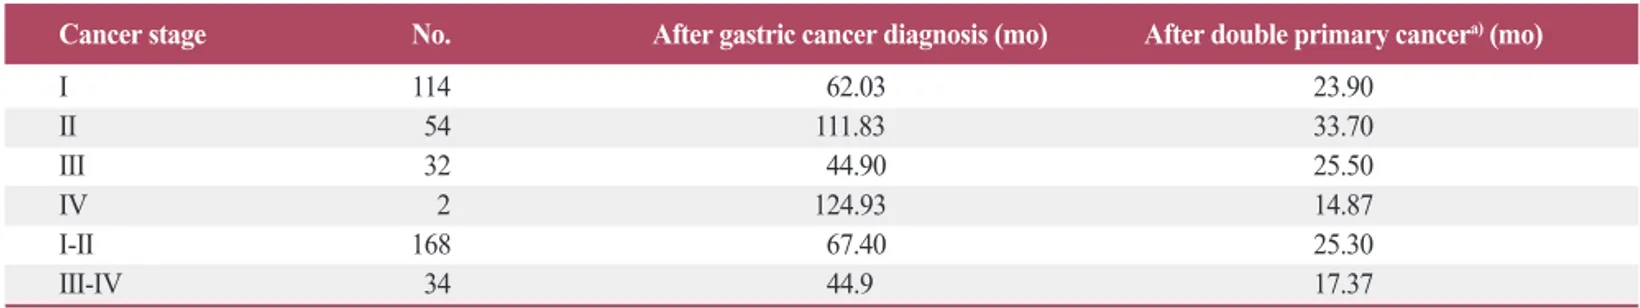 Table 6. Diagnosis of metachronous double primary cancer after five years from diagnosis of gastric cancer